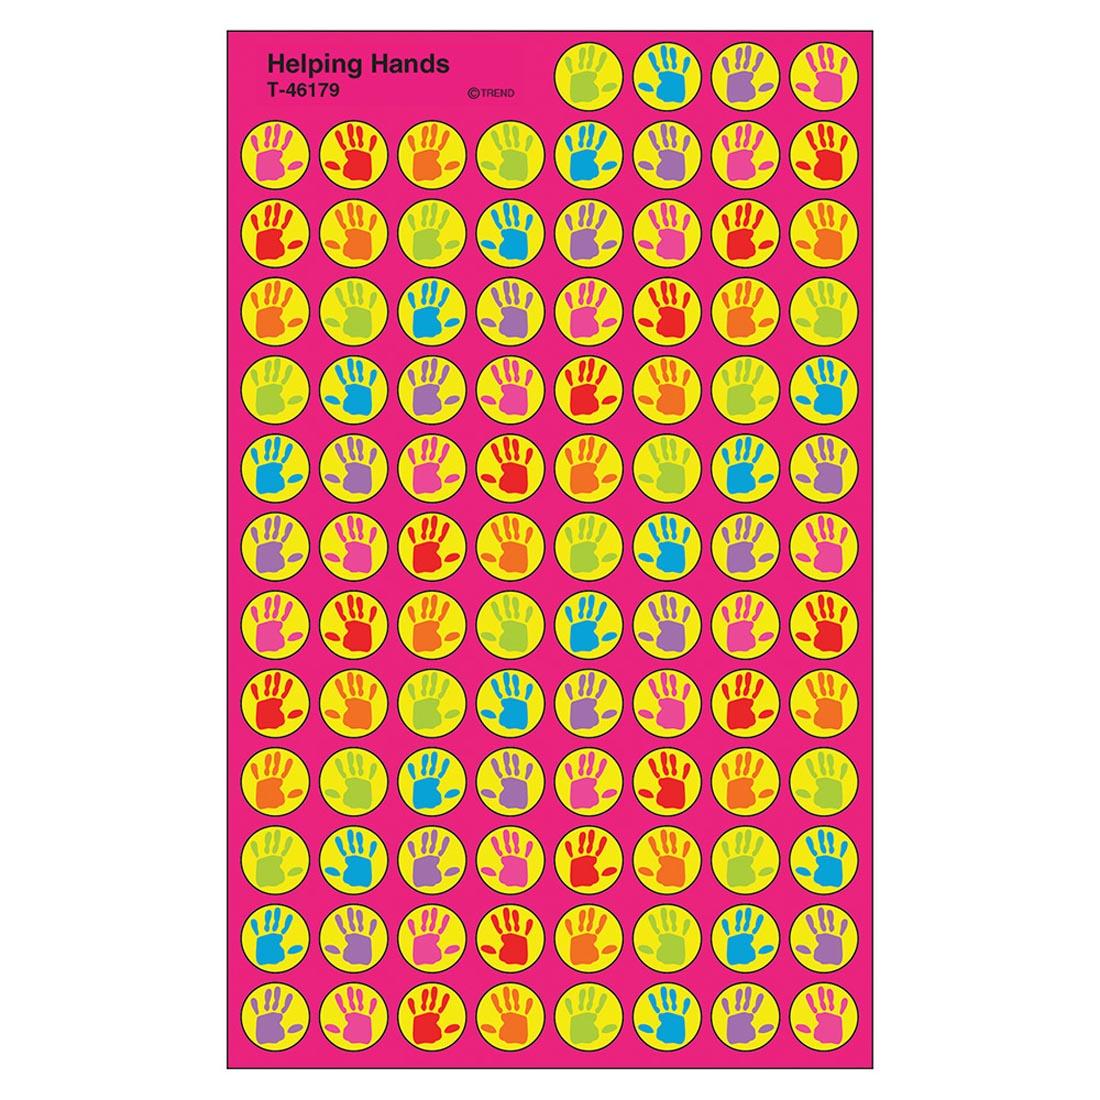 TREND Helping Hands superSpots Stickers